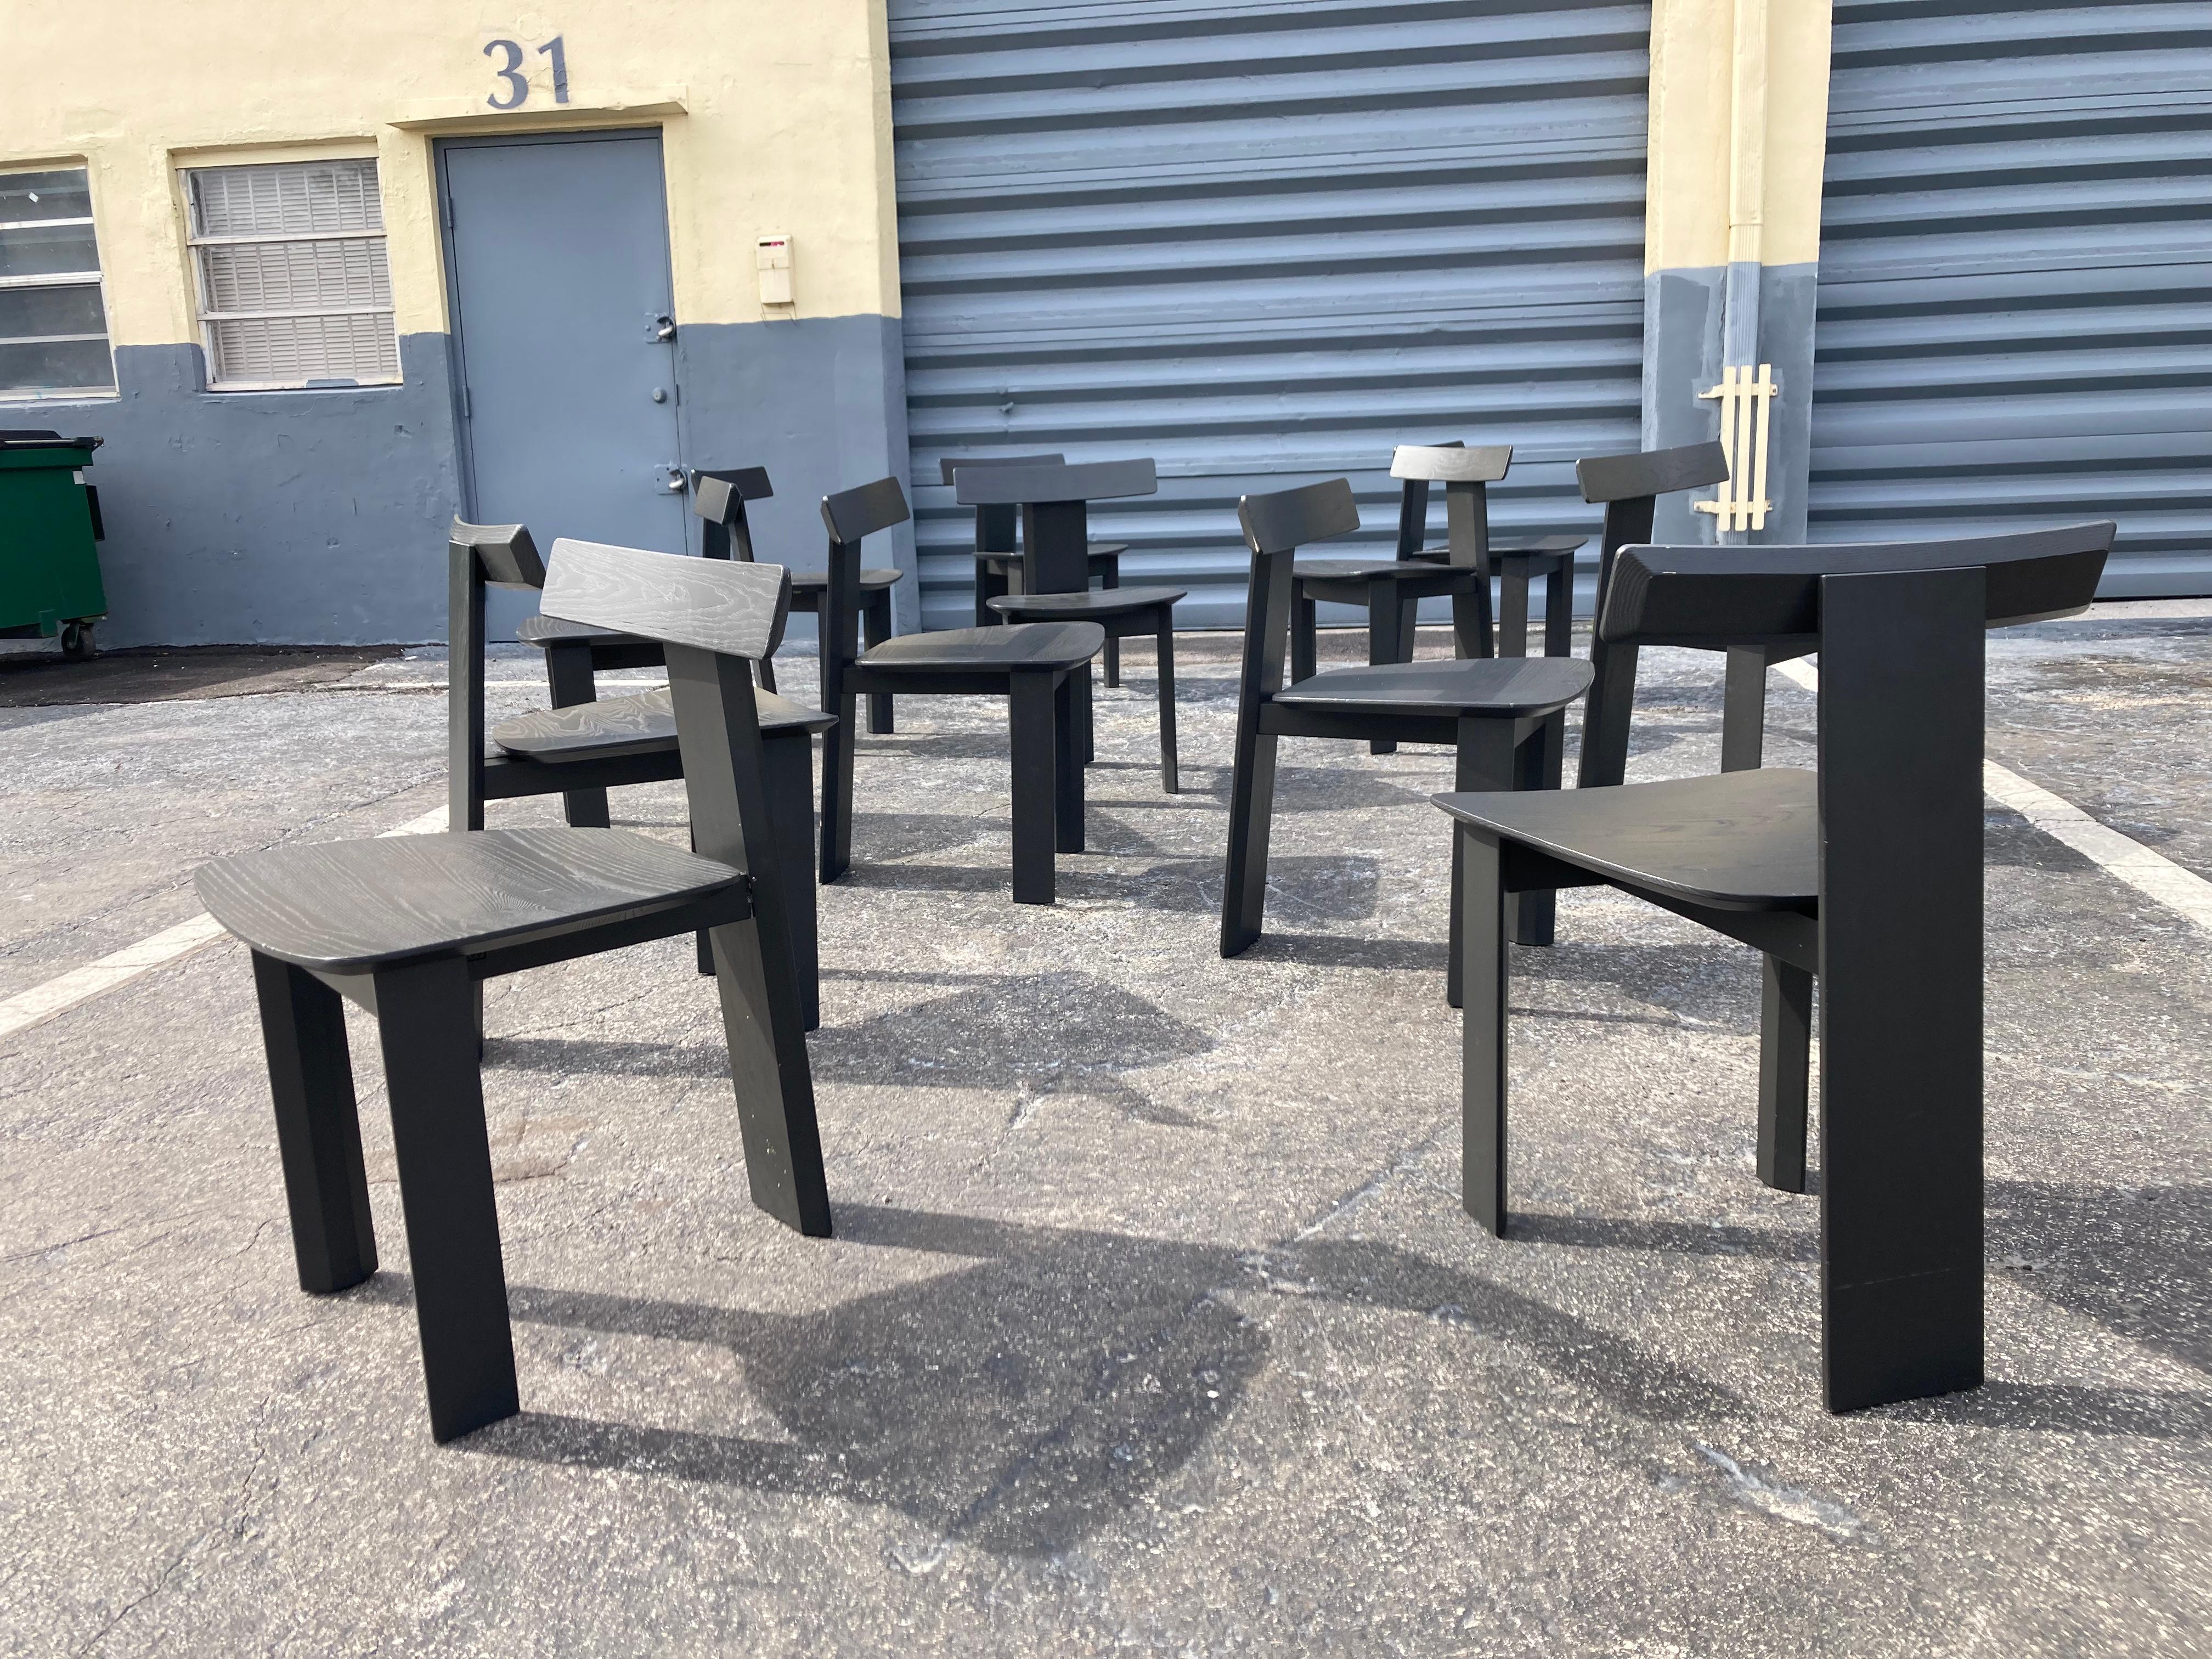 Set of Six Contemporary Dining Chairs MARK by Sebastian Herkner for Linteloo. 
Solid ash wood with gray paint finish. Made in Italy. In total we have twelve chairs available.